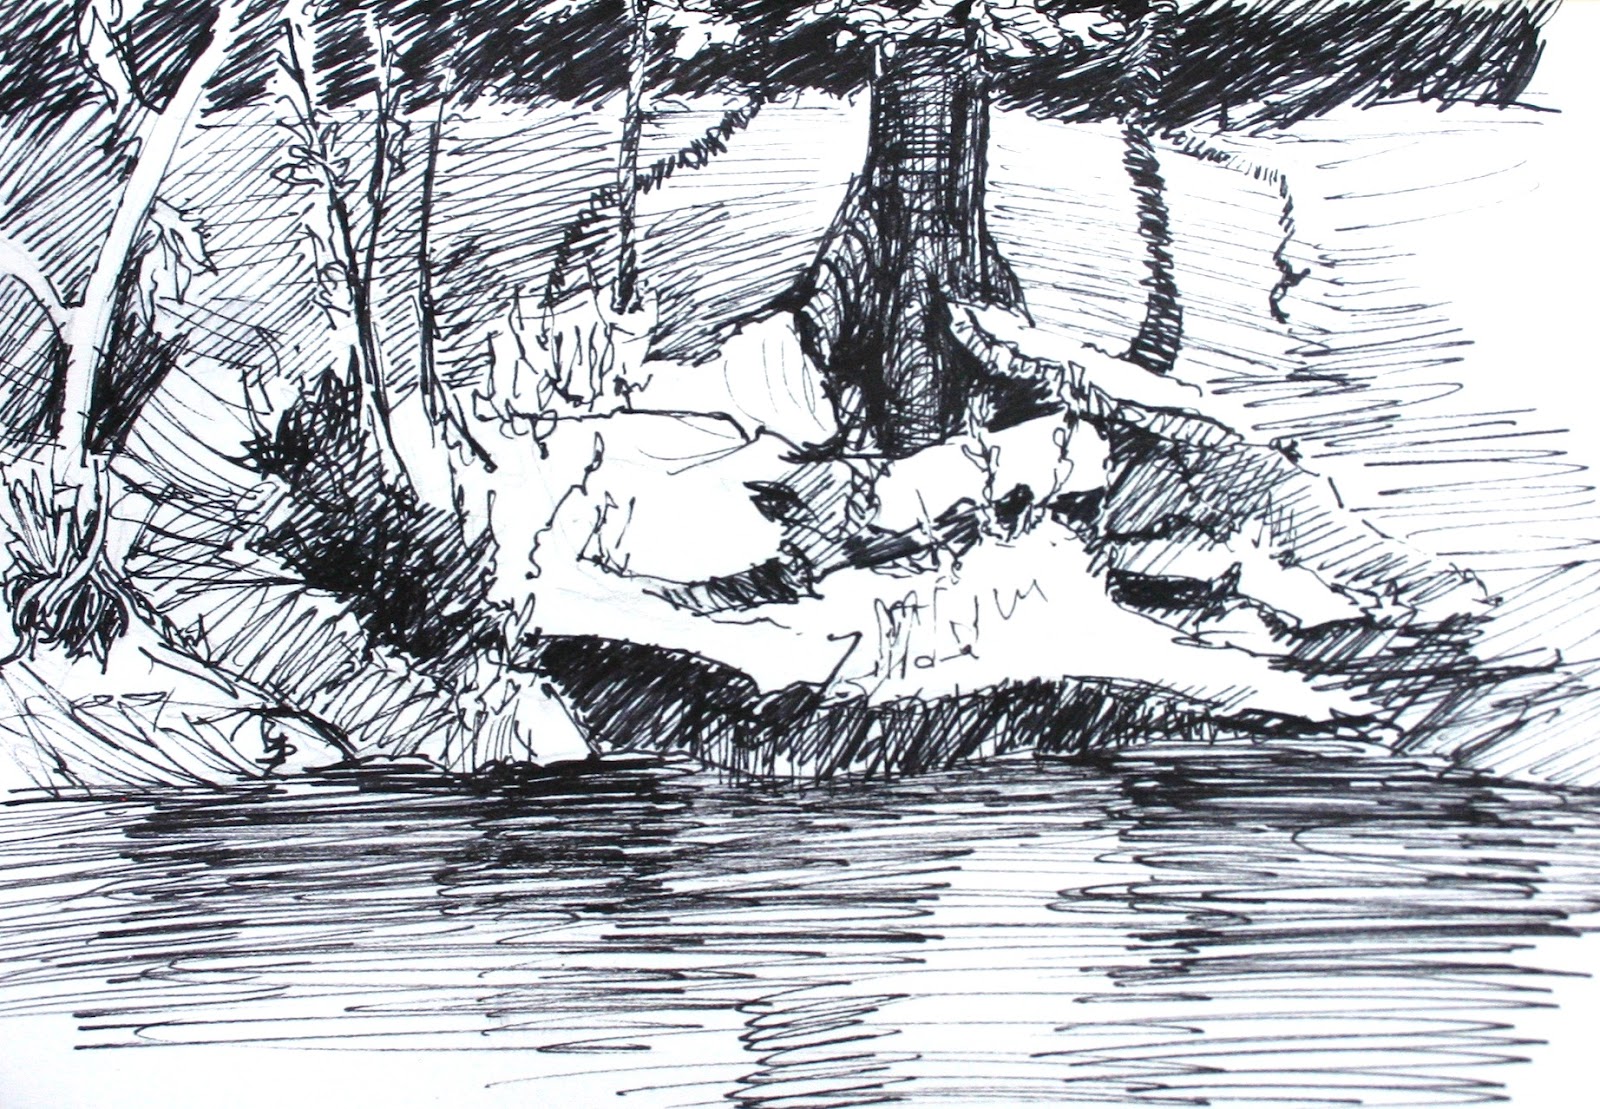 Art Stuff: Another River Sketch